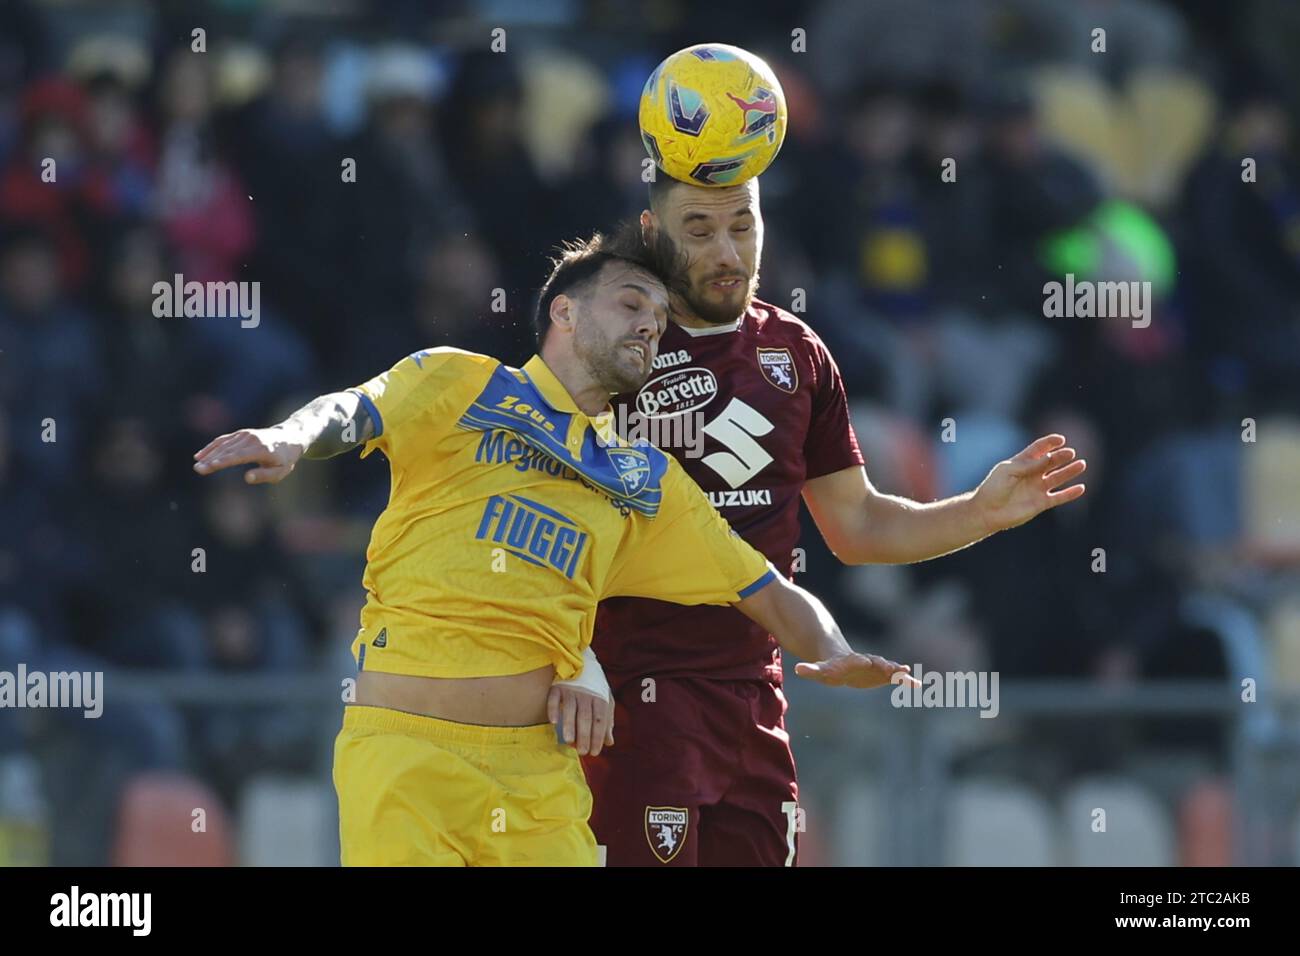 Frosinone, Italy. 10th Dec, 2023. Torino's Croatian midfielder Nikola Vlasic challenges for the ball with Frosinone's Italian midfielder Francesco Gelli during the Serie A football match between Frosinone Calcio vs Torino at the Benito Stirpe stadium in Frosinone, Italy on December 10, 2023. Credit: Independent Photo Agency/Alamy Live News Stock Photo